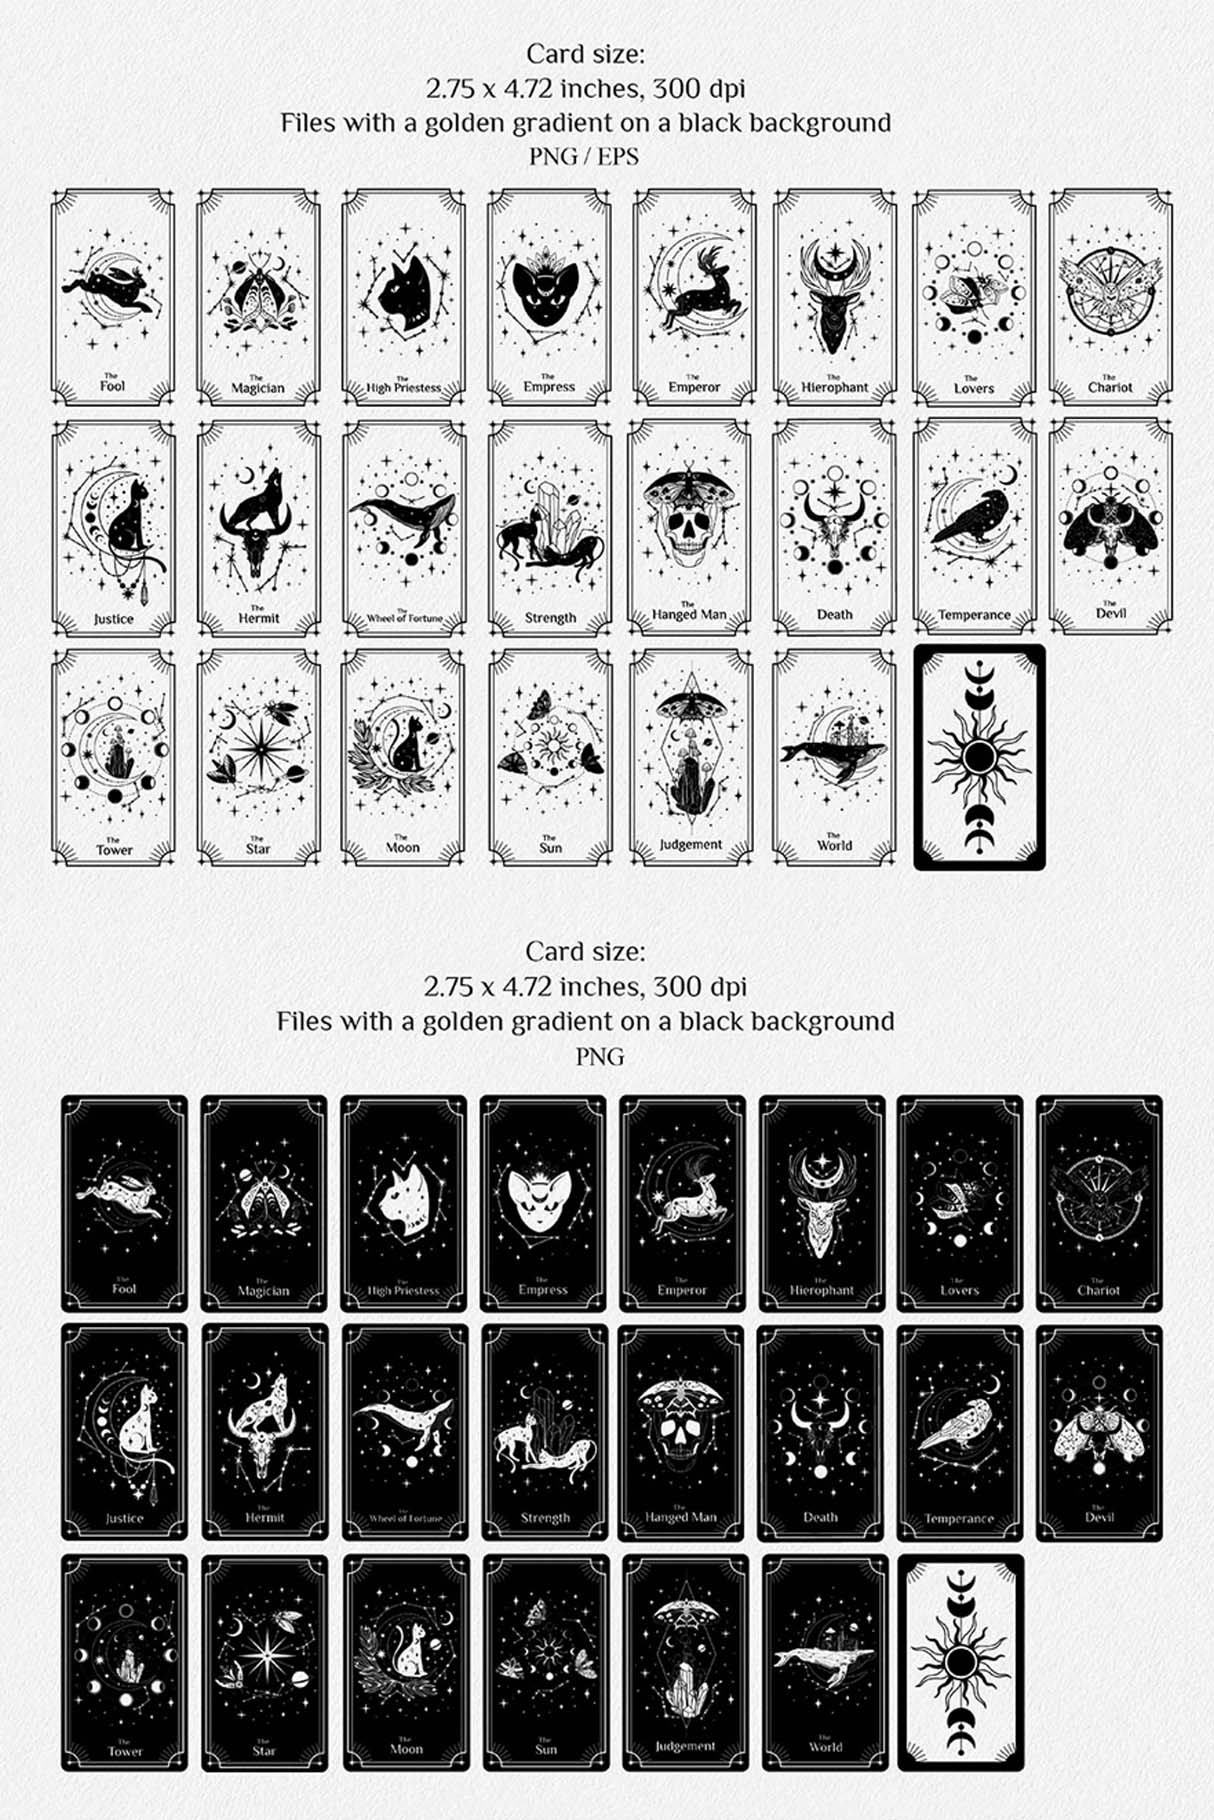 Two cards versions - black and white with the mystical animals.